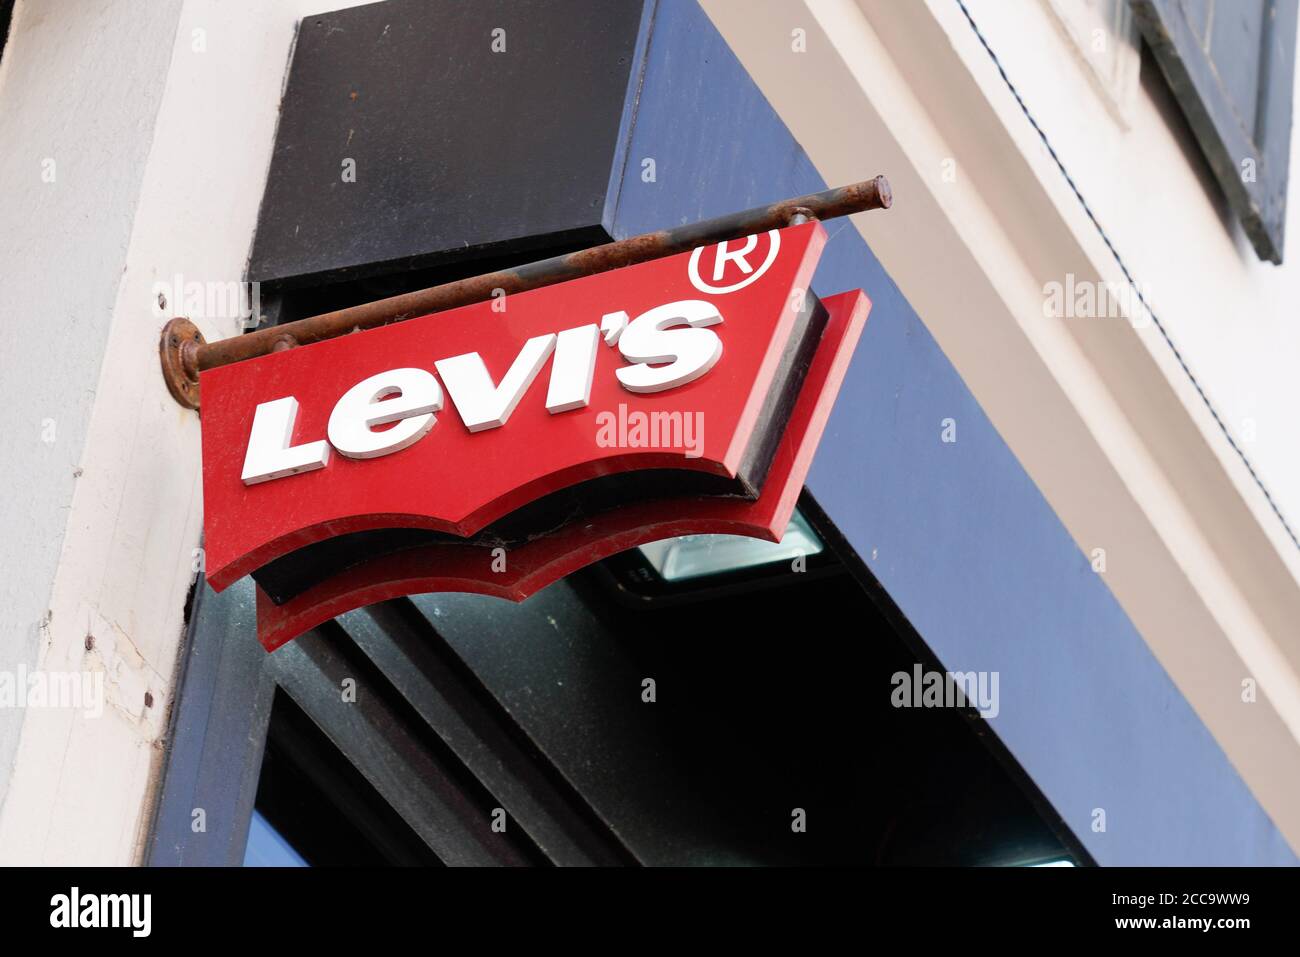 Bordeaux , Aquitaine / France - 08 16 2020 : Levi's red sign and text logo  Levi Strauss levis American clothing company of denim jeans Stock Photo -  Alamy